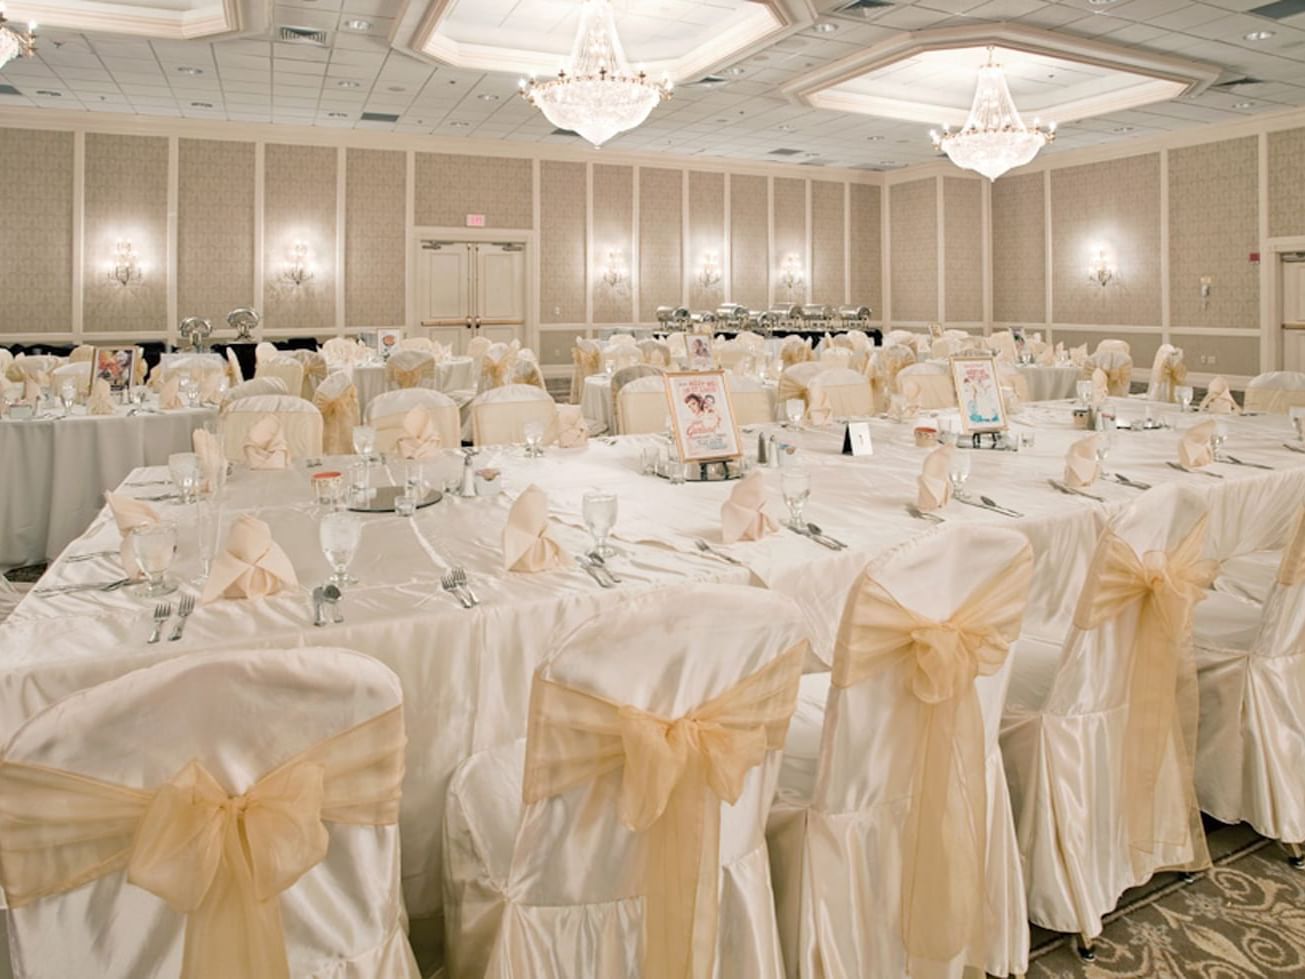 Decorated tables & chairs in a ballroom at Clayton Plaza Hotel